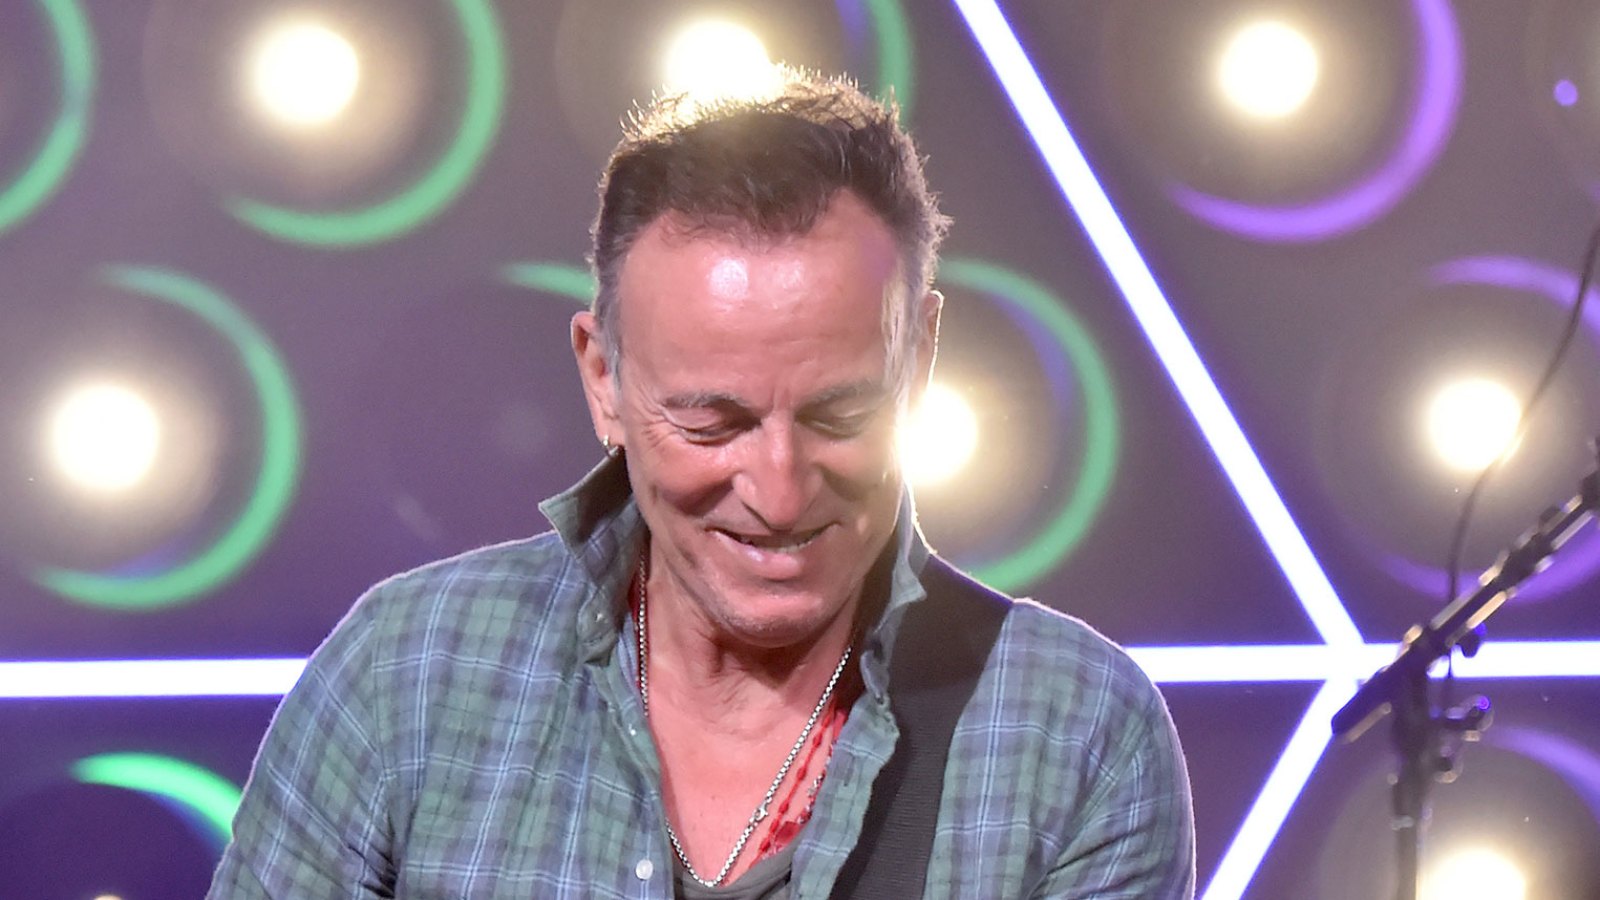 Bruce Springsteen Is Still in His ‘Glory Days’ at 69: ‘Energy Wise, I Don’t Feel Anything Different’